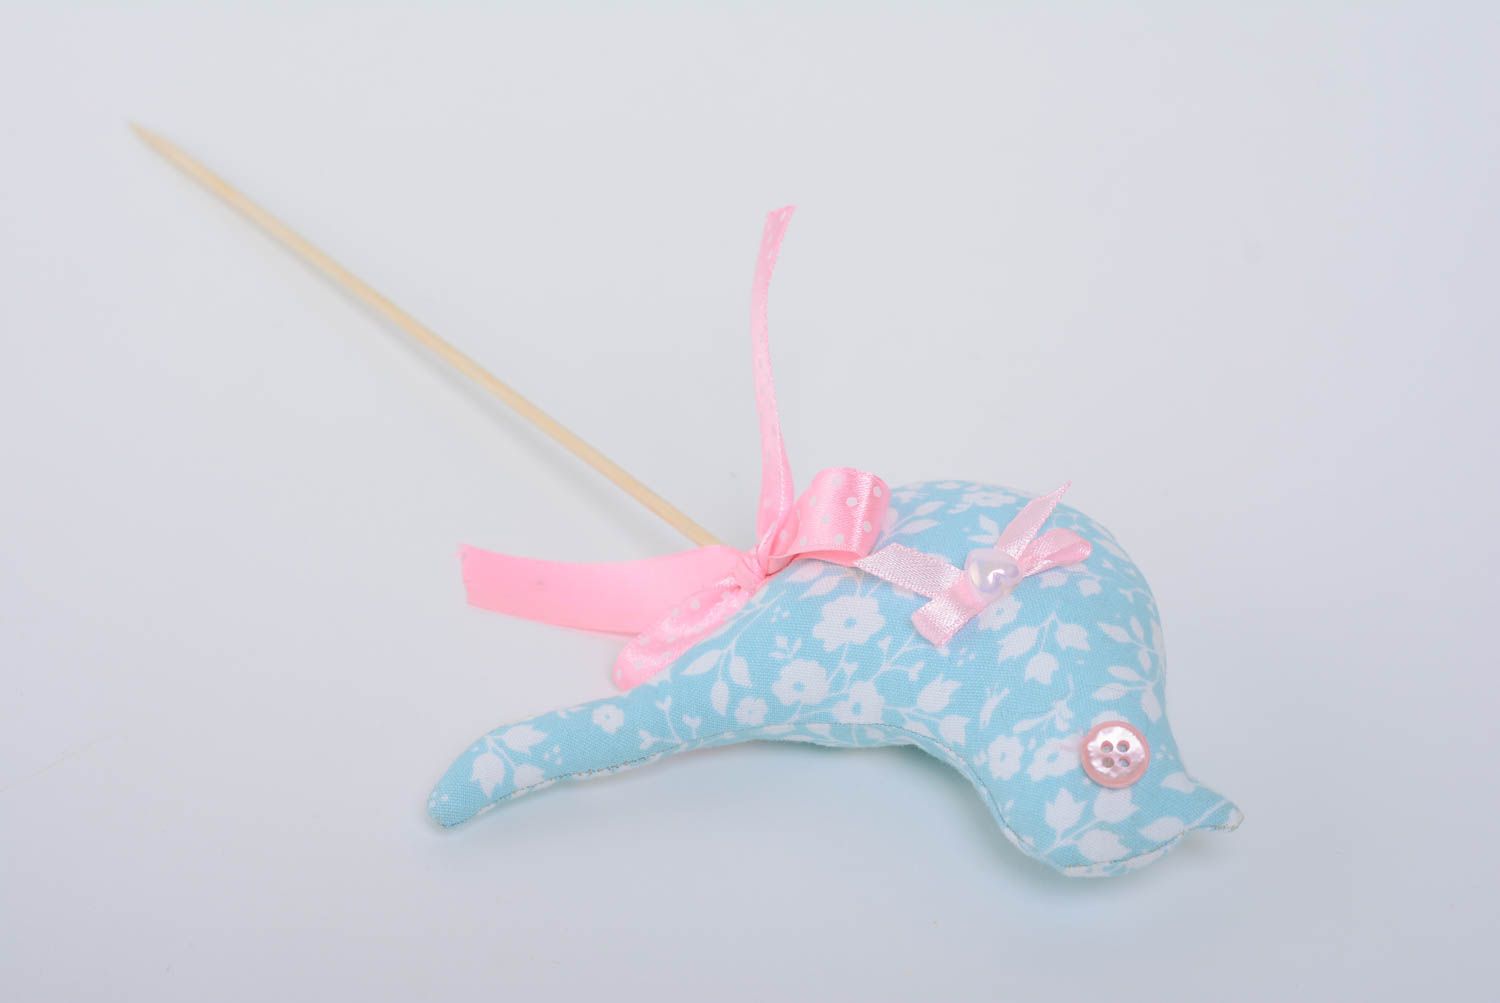 Toy on stick for flower pots decoration blue bird with a pink bow hand made photo 4